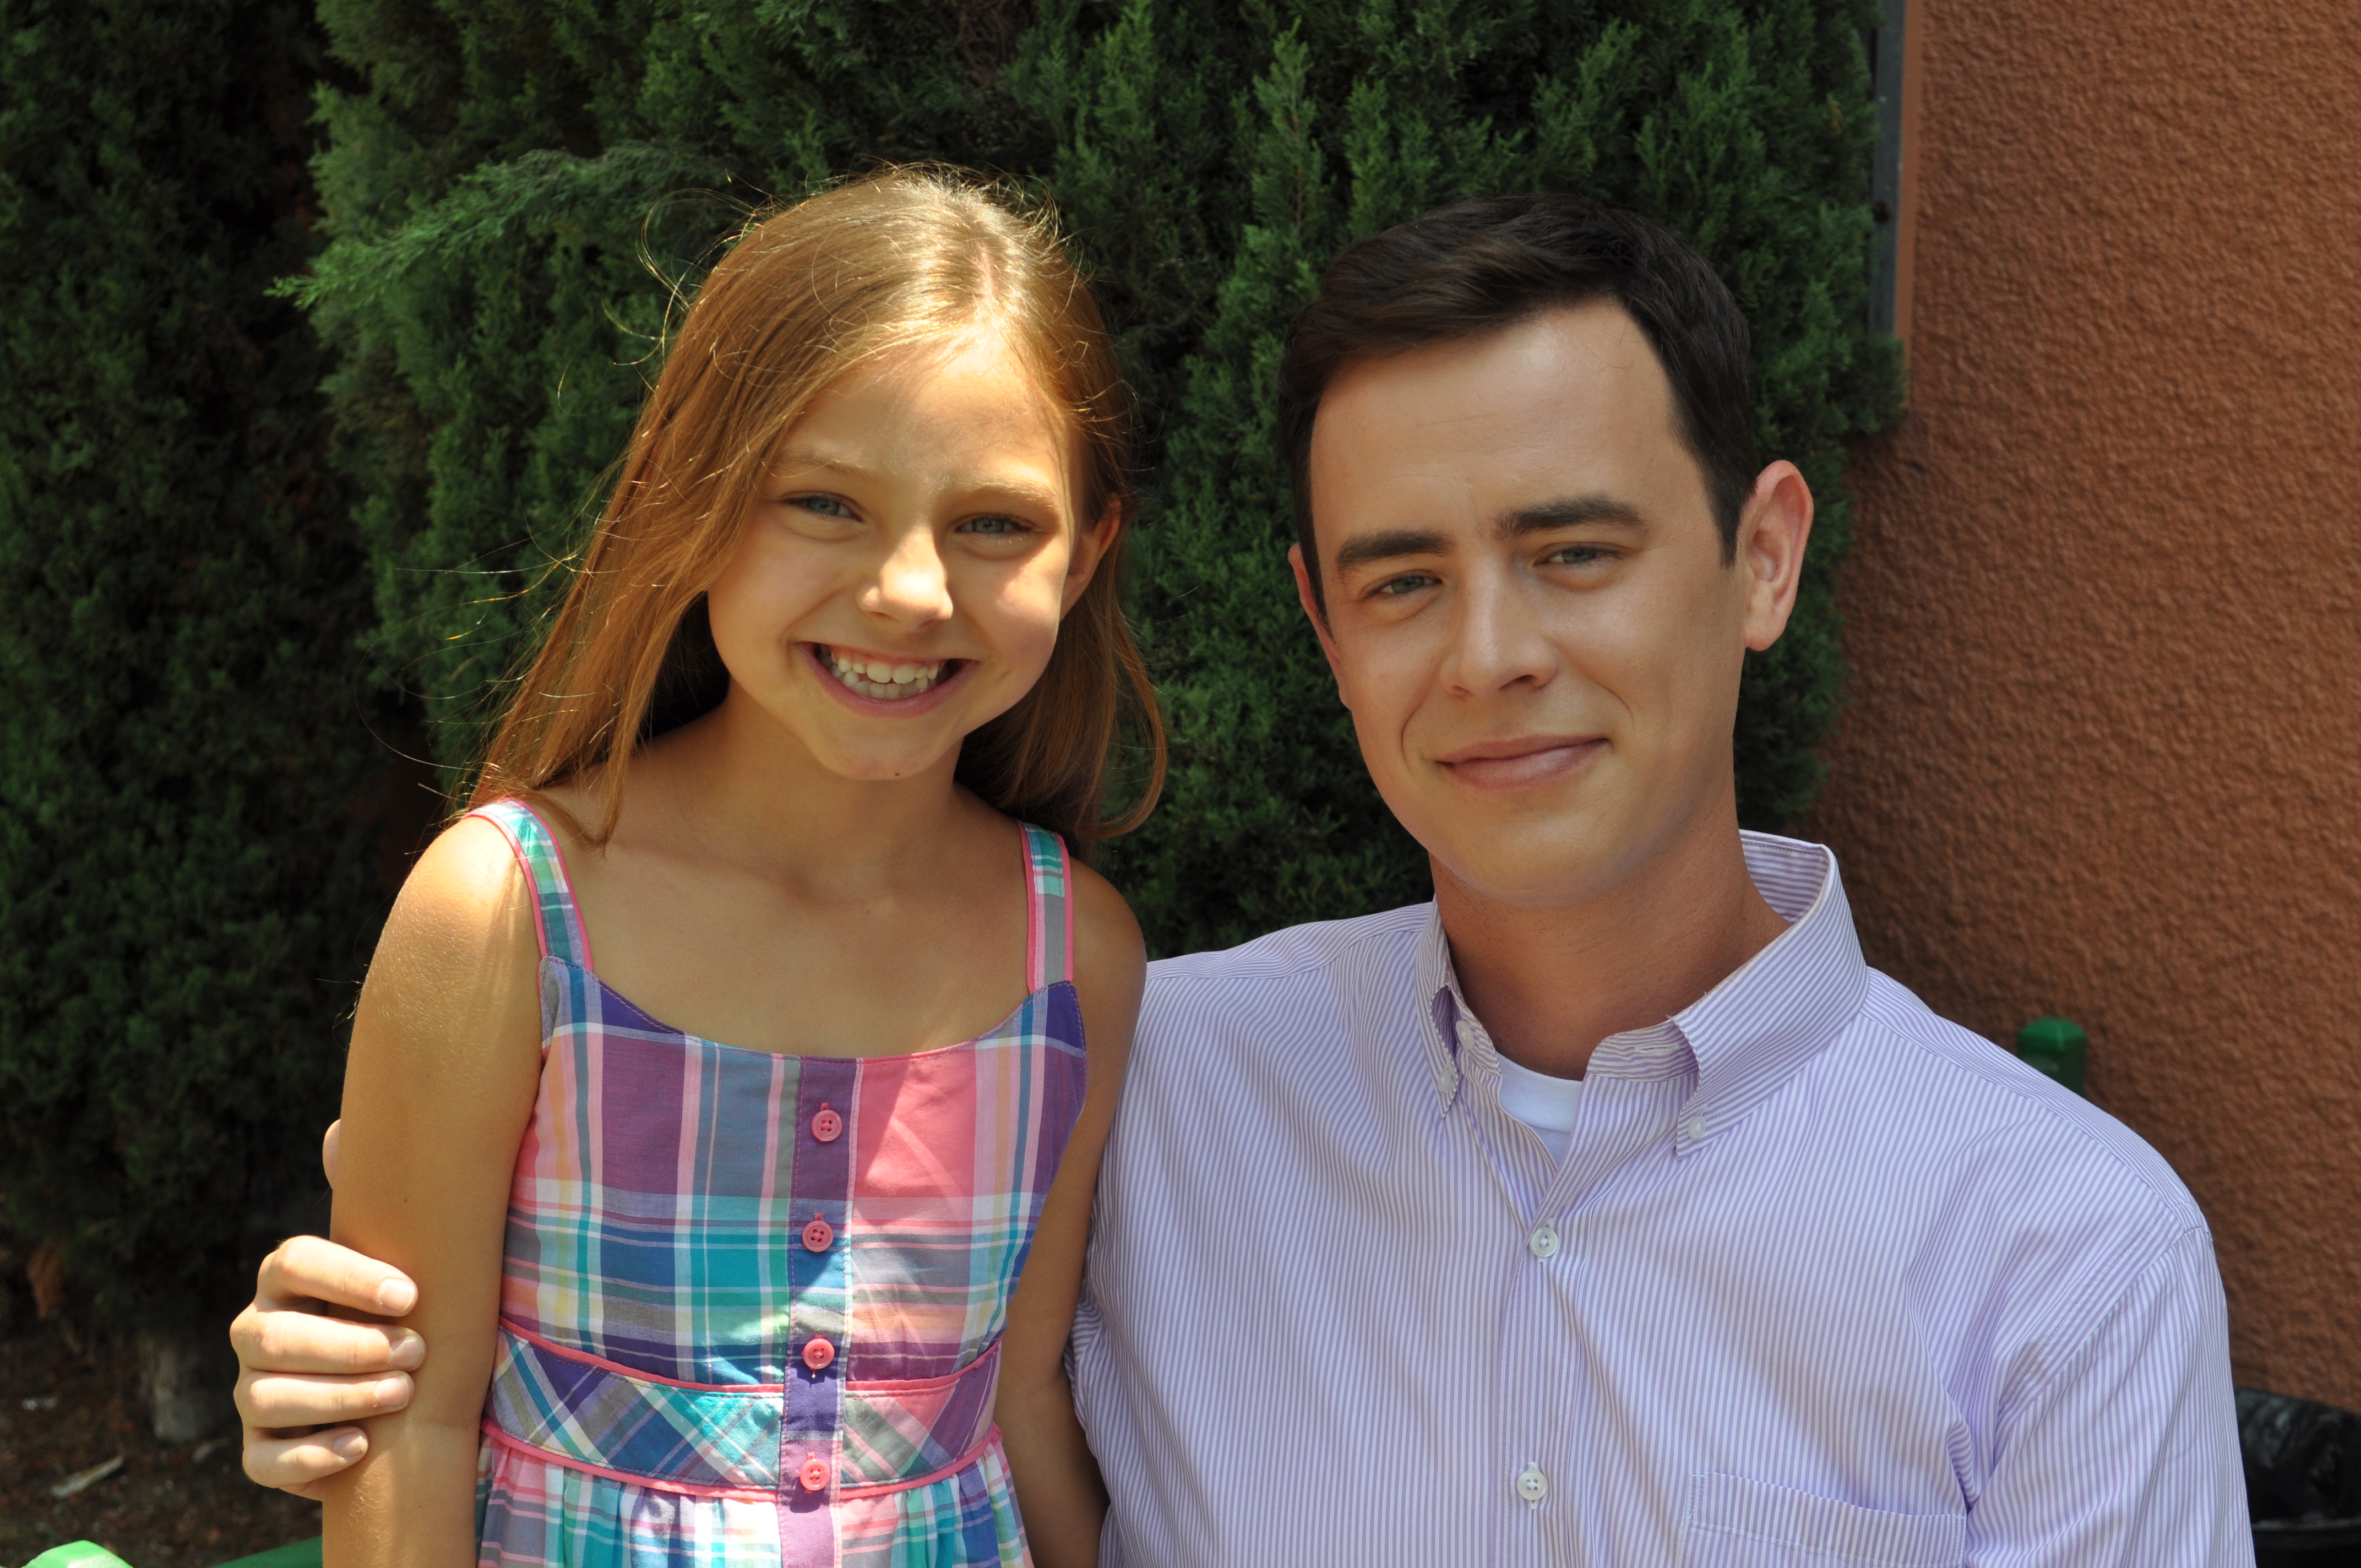 Caitlin Carmichael and Colin Hanks on the set of 